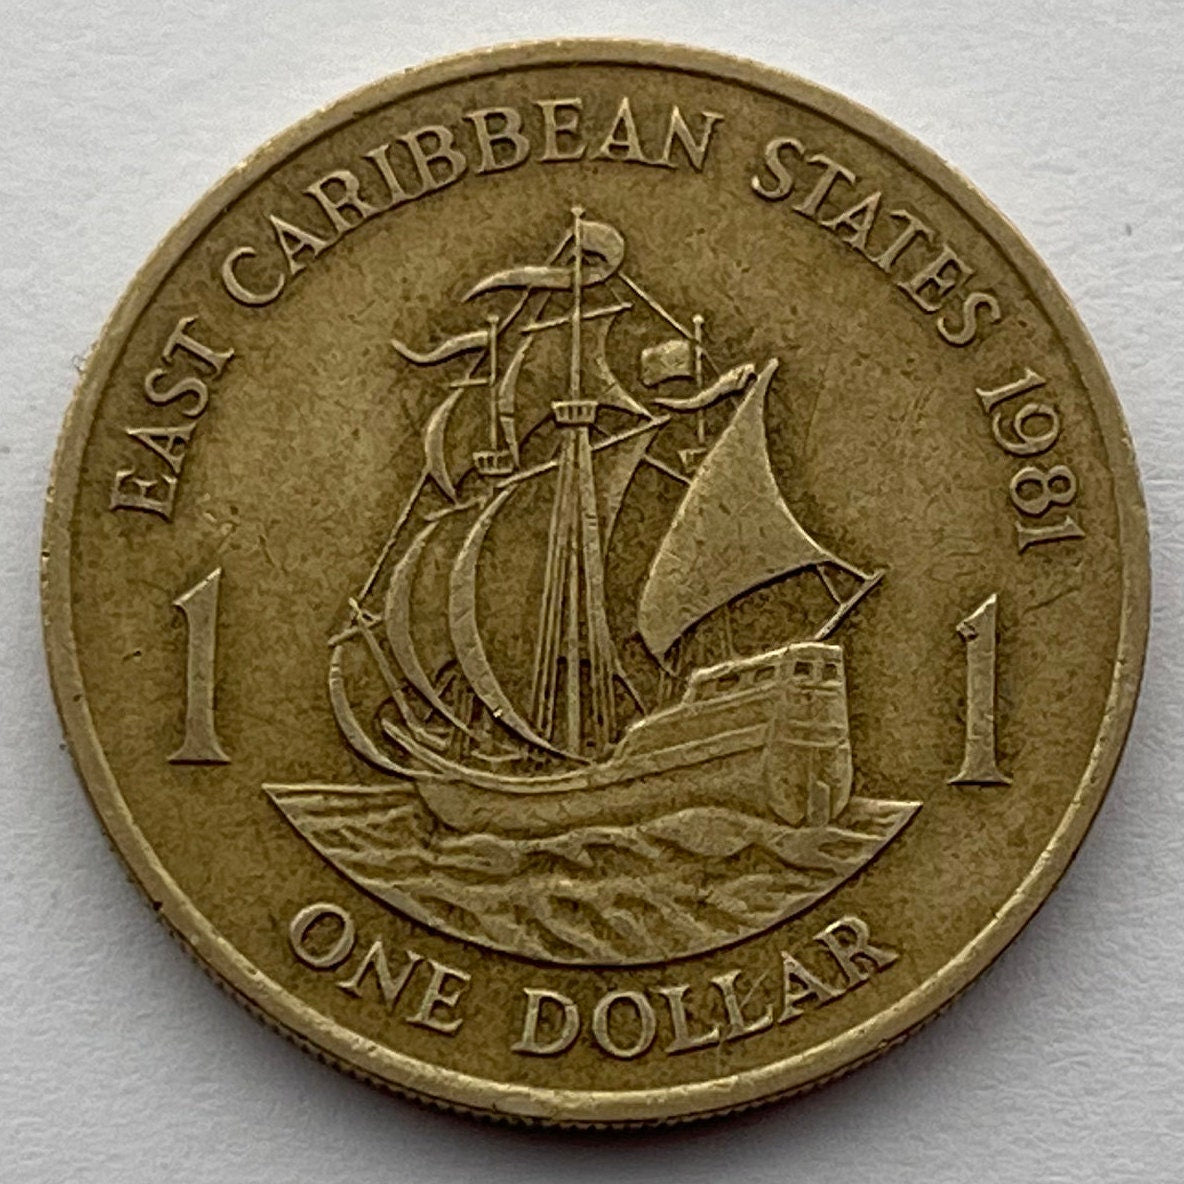 Golden Hind Galleon of Sir Francis Drake 1 Dollar East Caribbean States Authentic Coin Money for Jewelry and Crafts (CONDITION: VERY FINE)